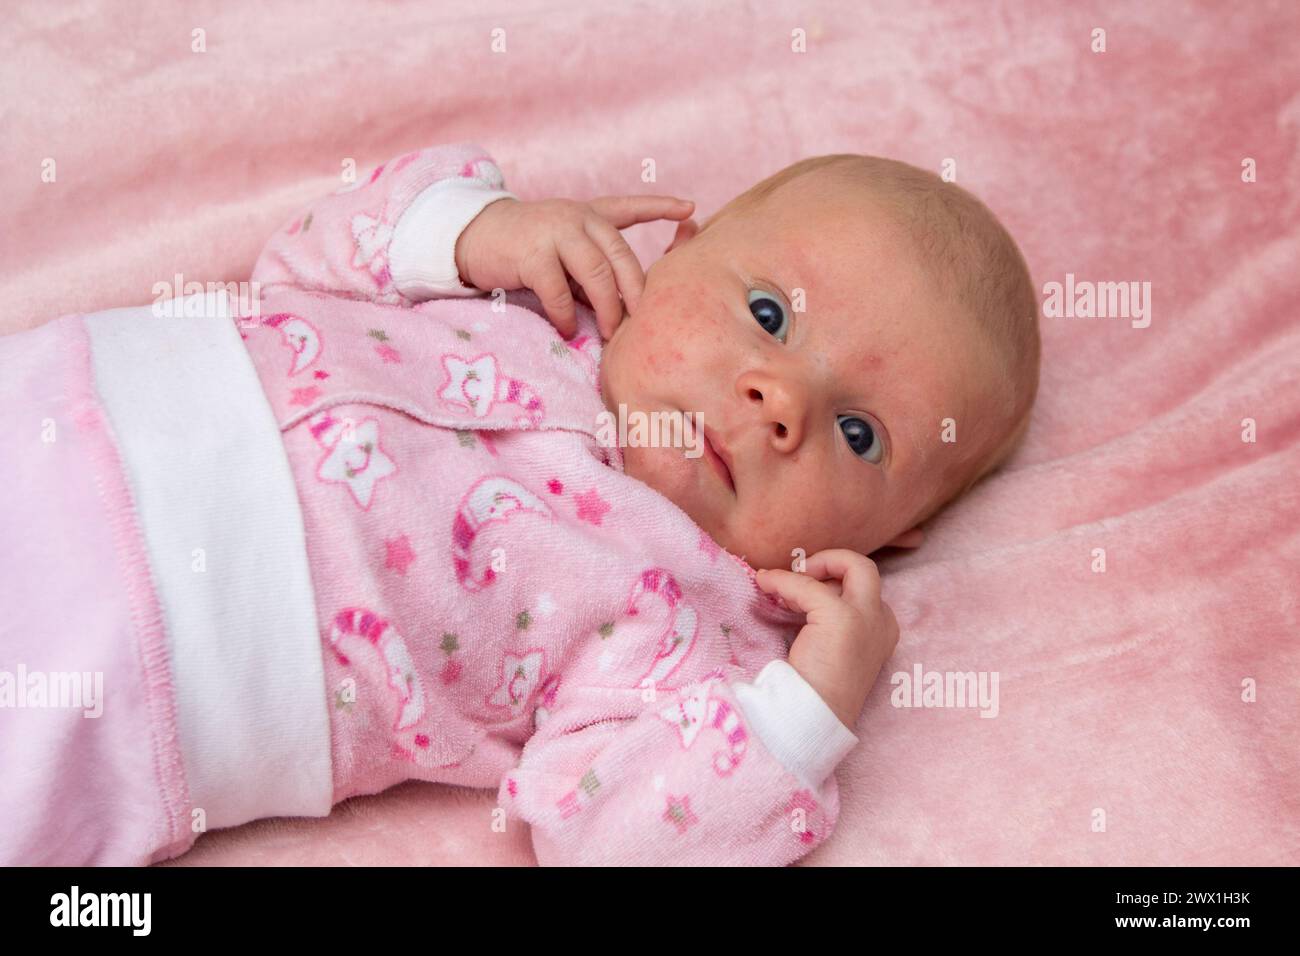 The baby lies on the bed and has allergies, rashes on the face of the newborn Stock Photo